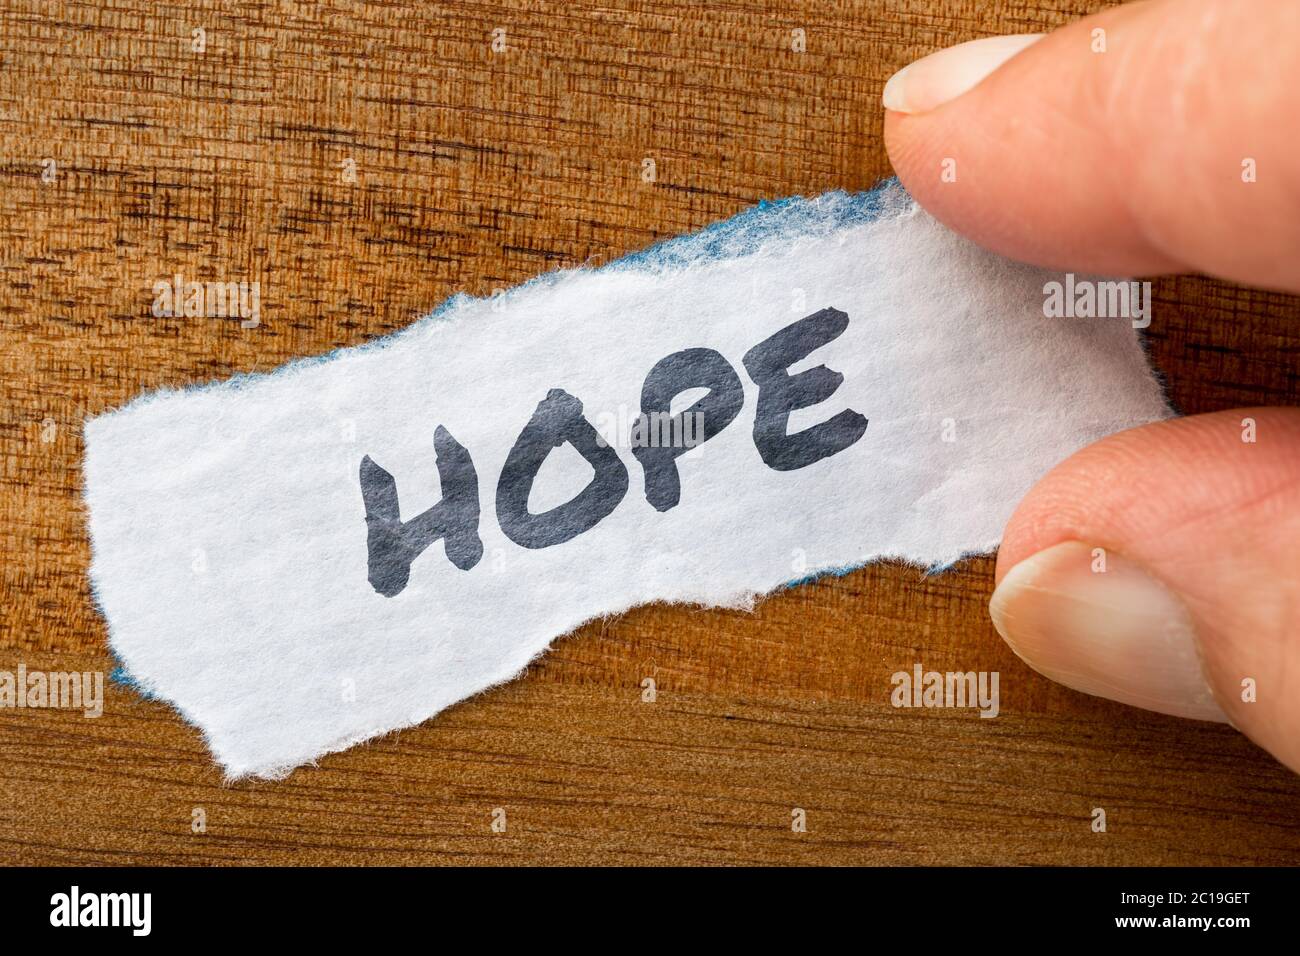 Hope concept and theme written on old paper on a grunge background Stock Photo